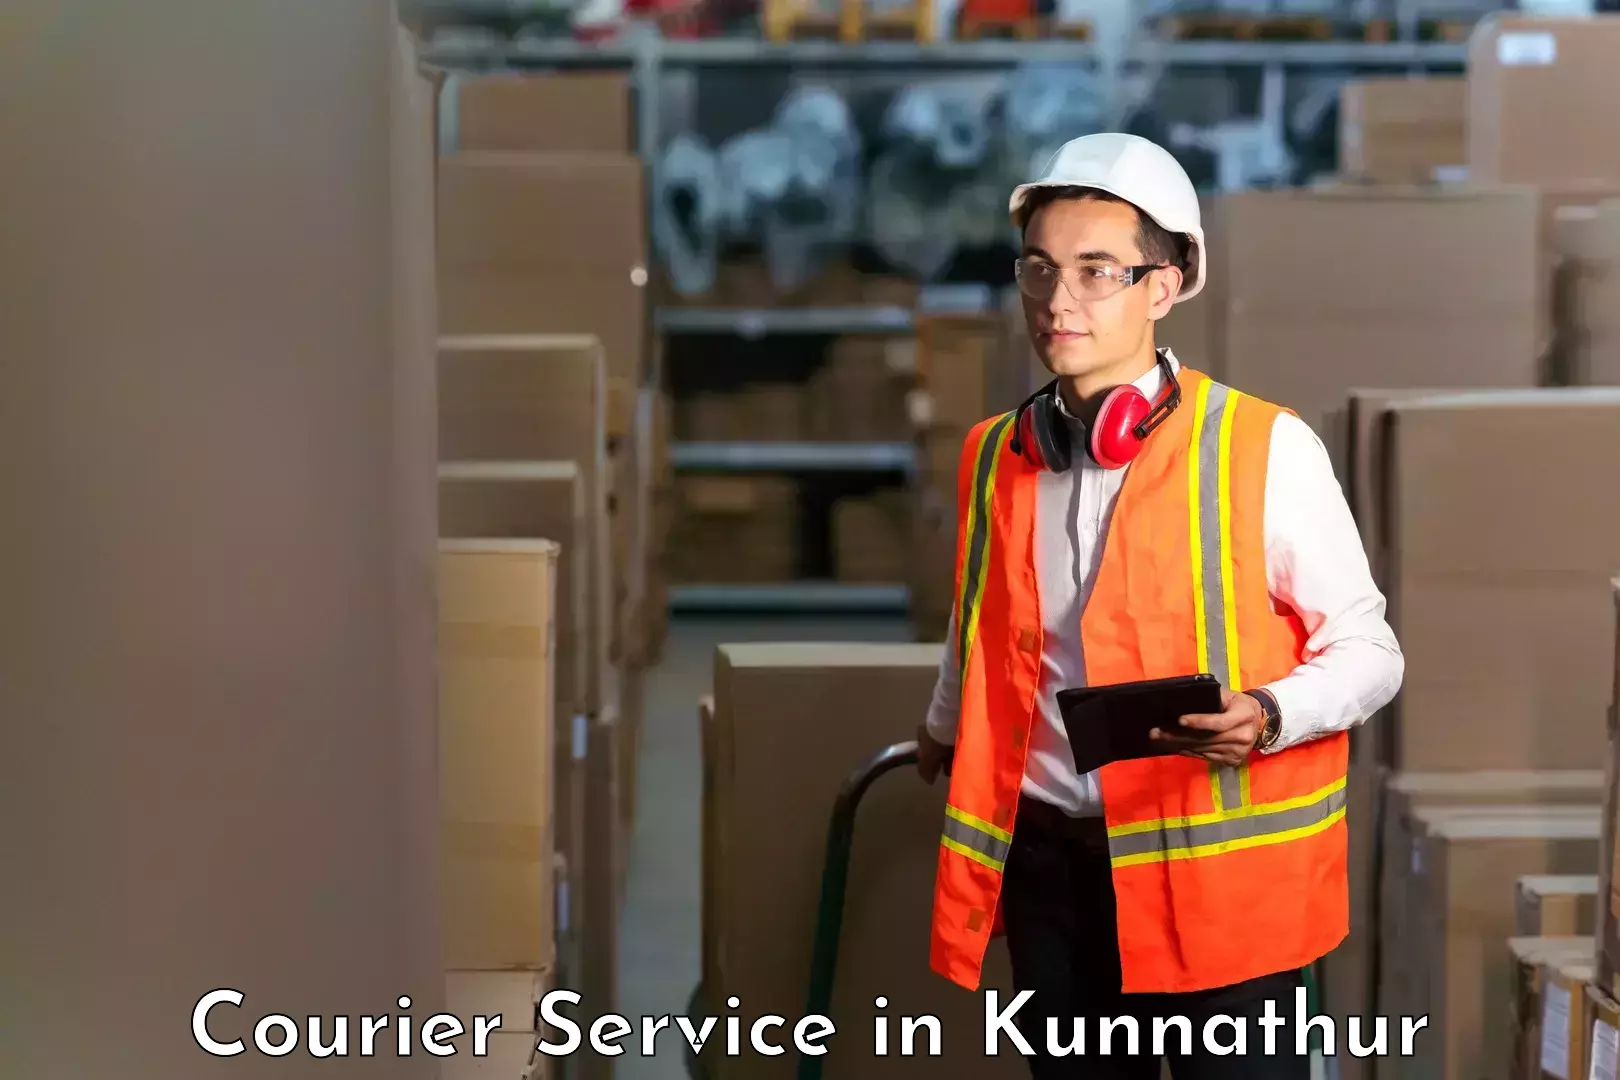 Courier service innovation in Kunnathur